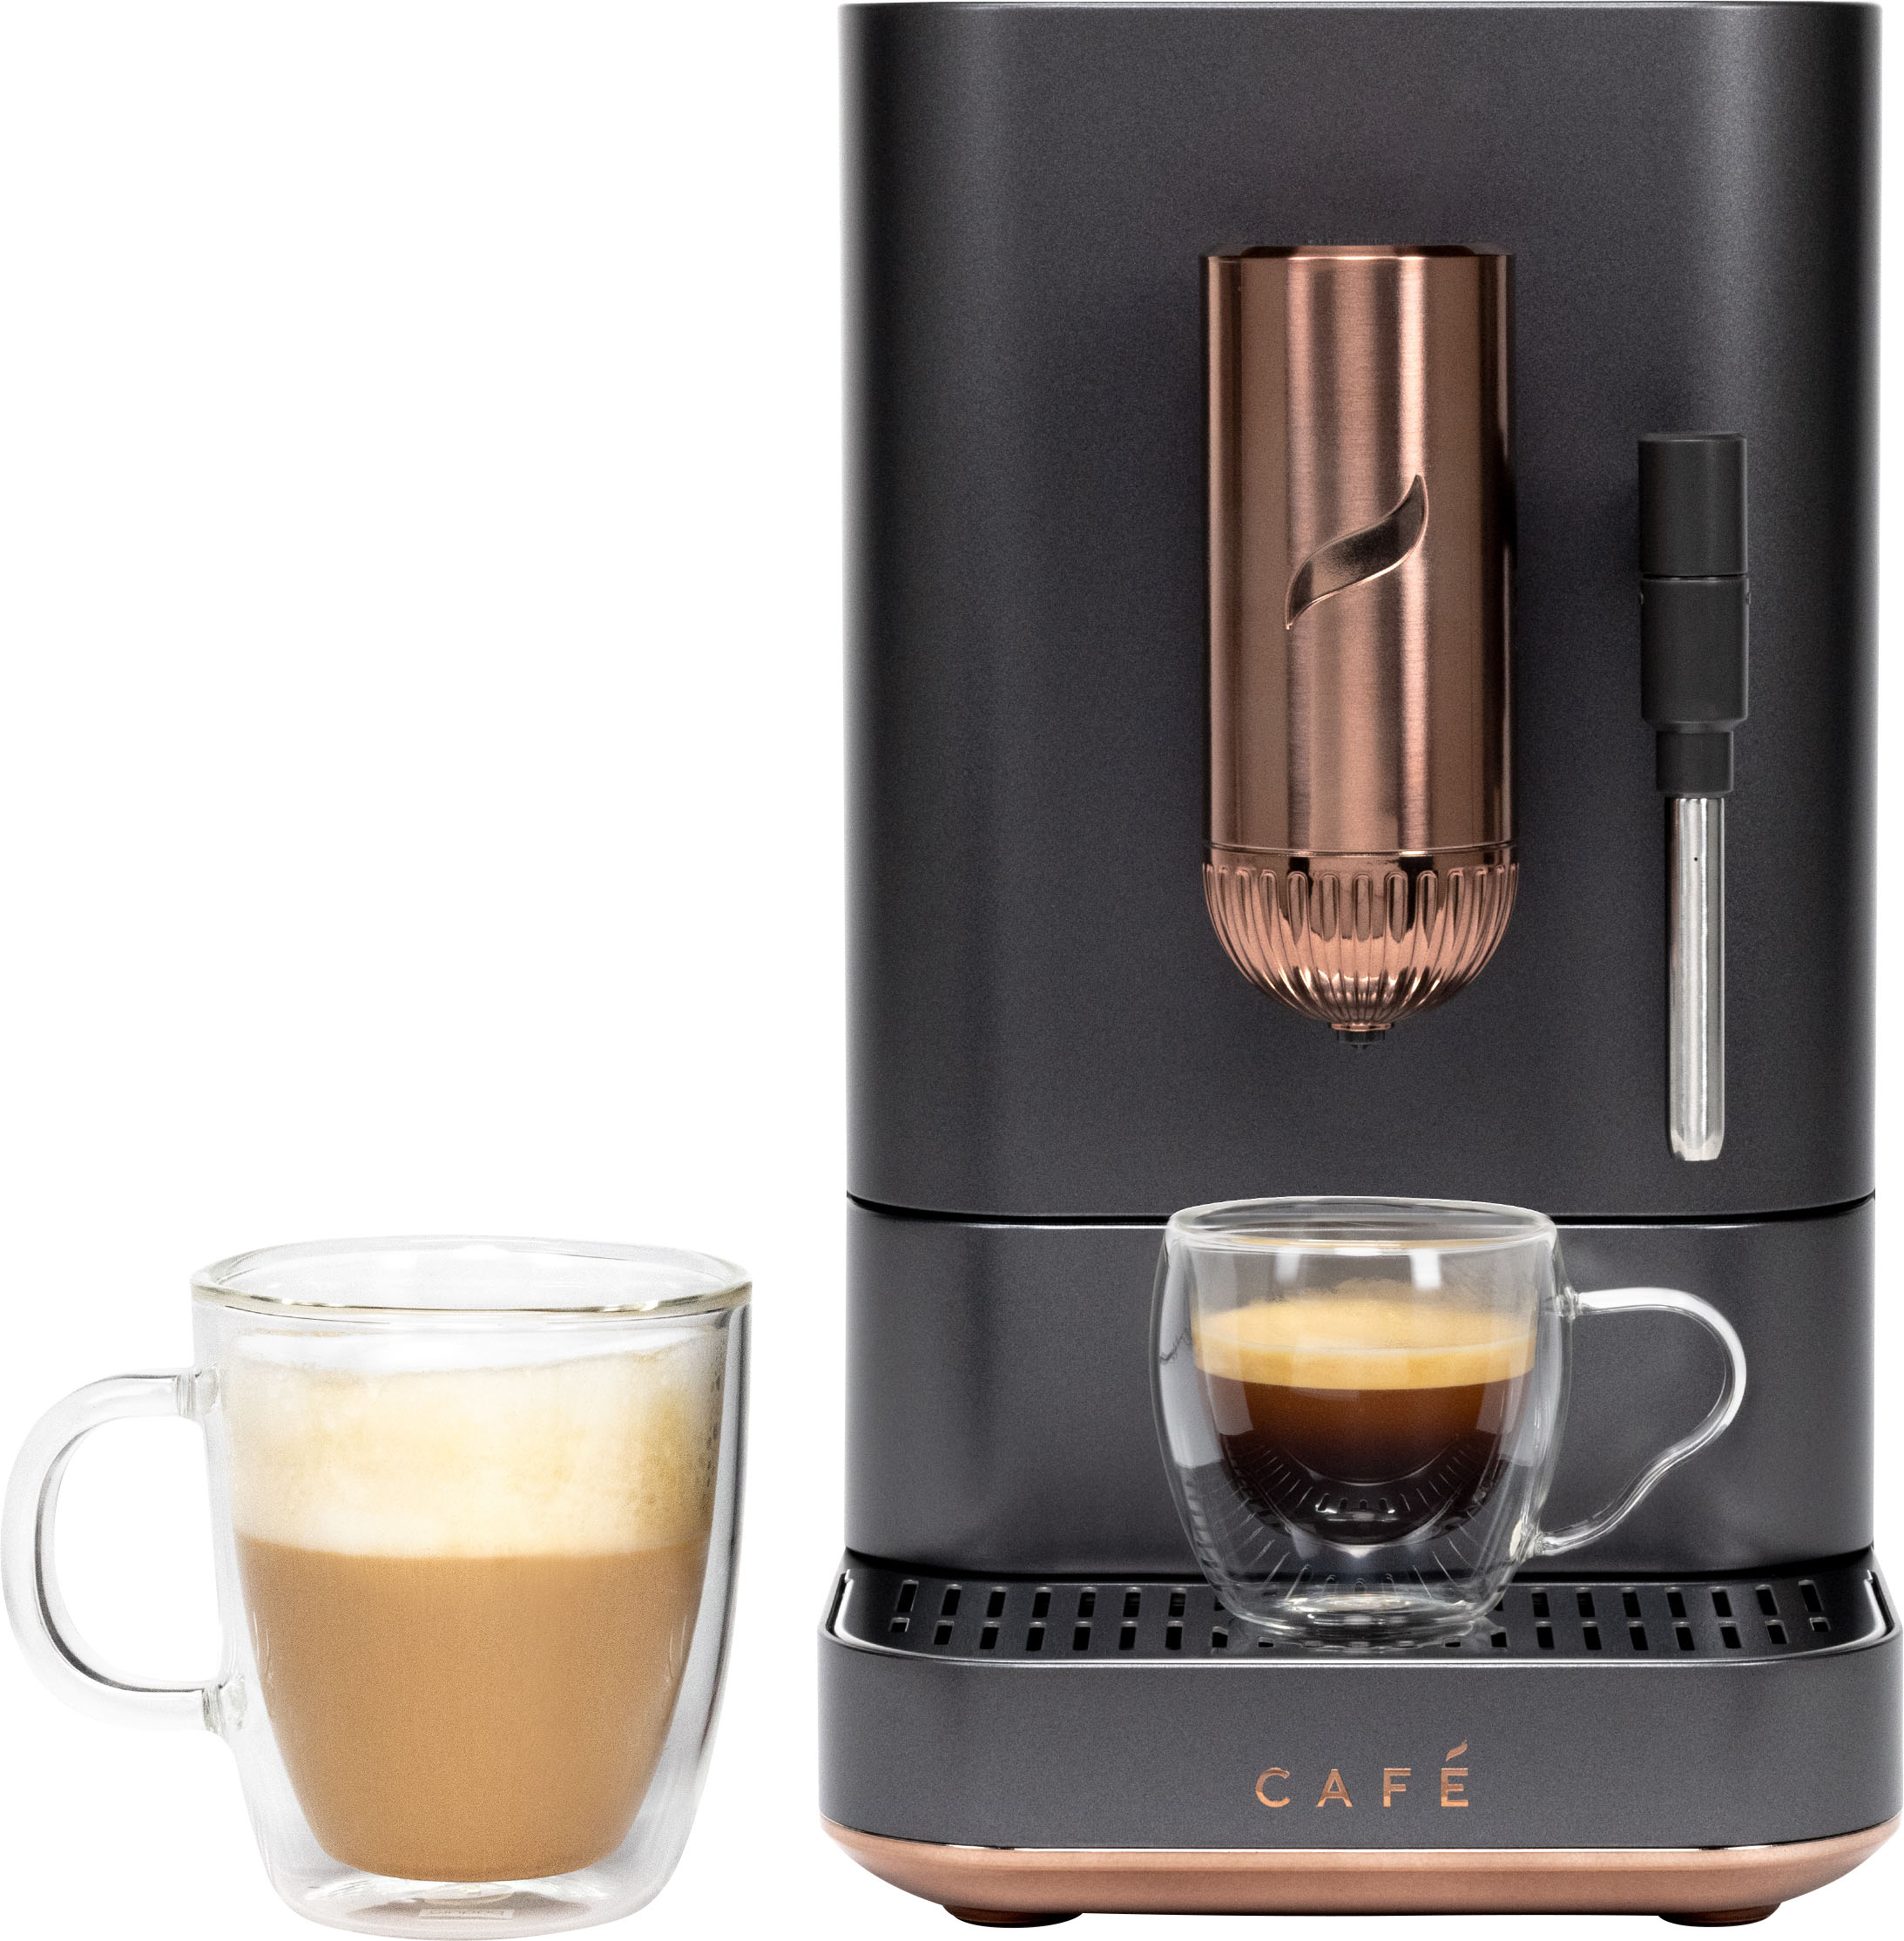 Best Automatic Coffee Machine for the Price